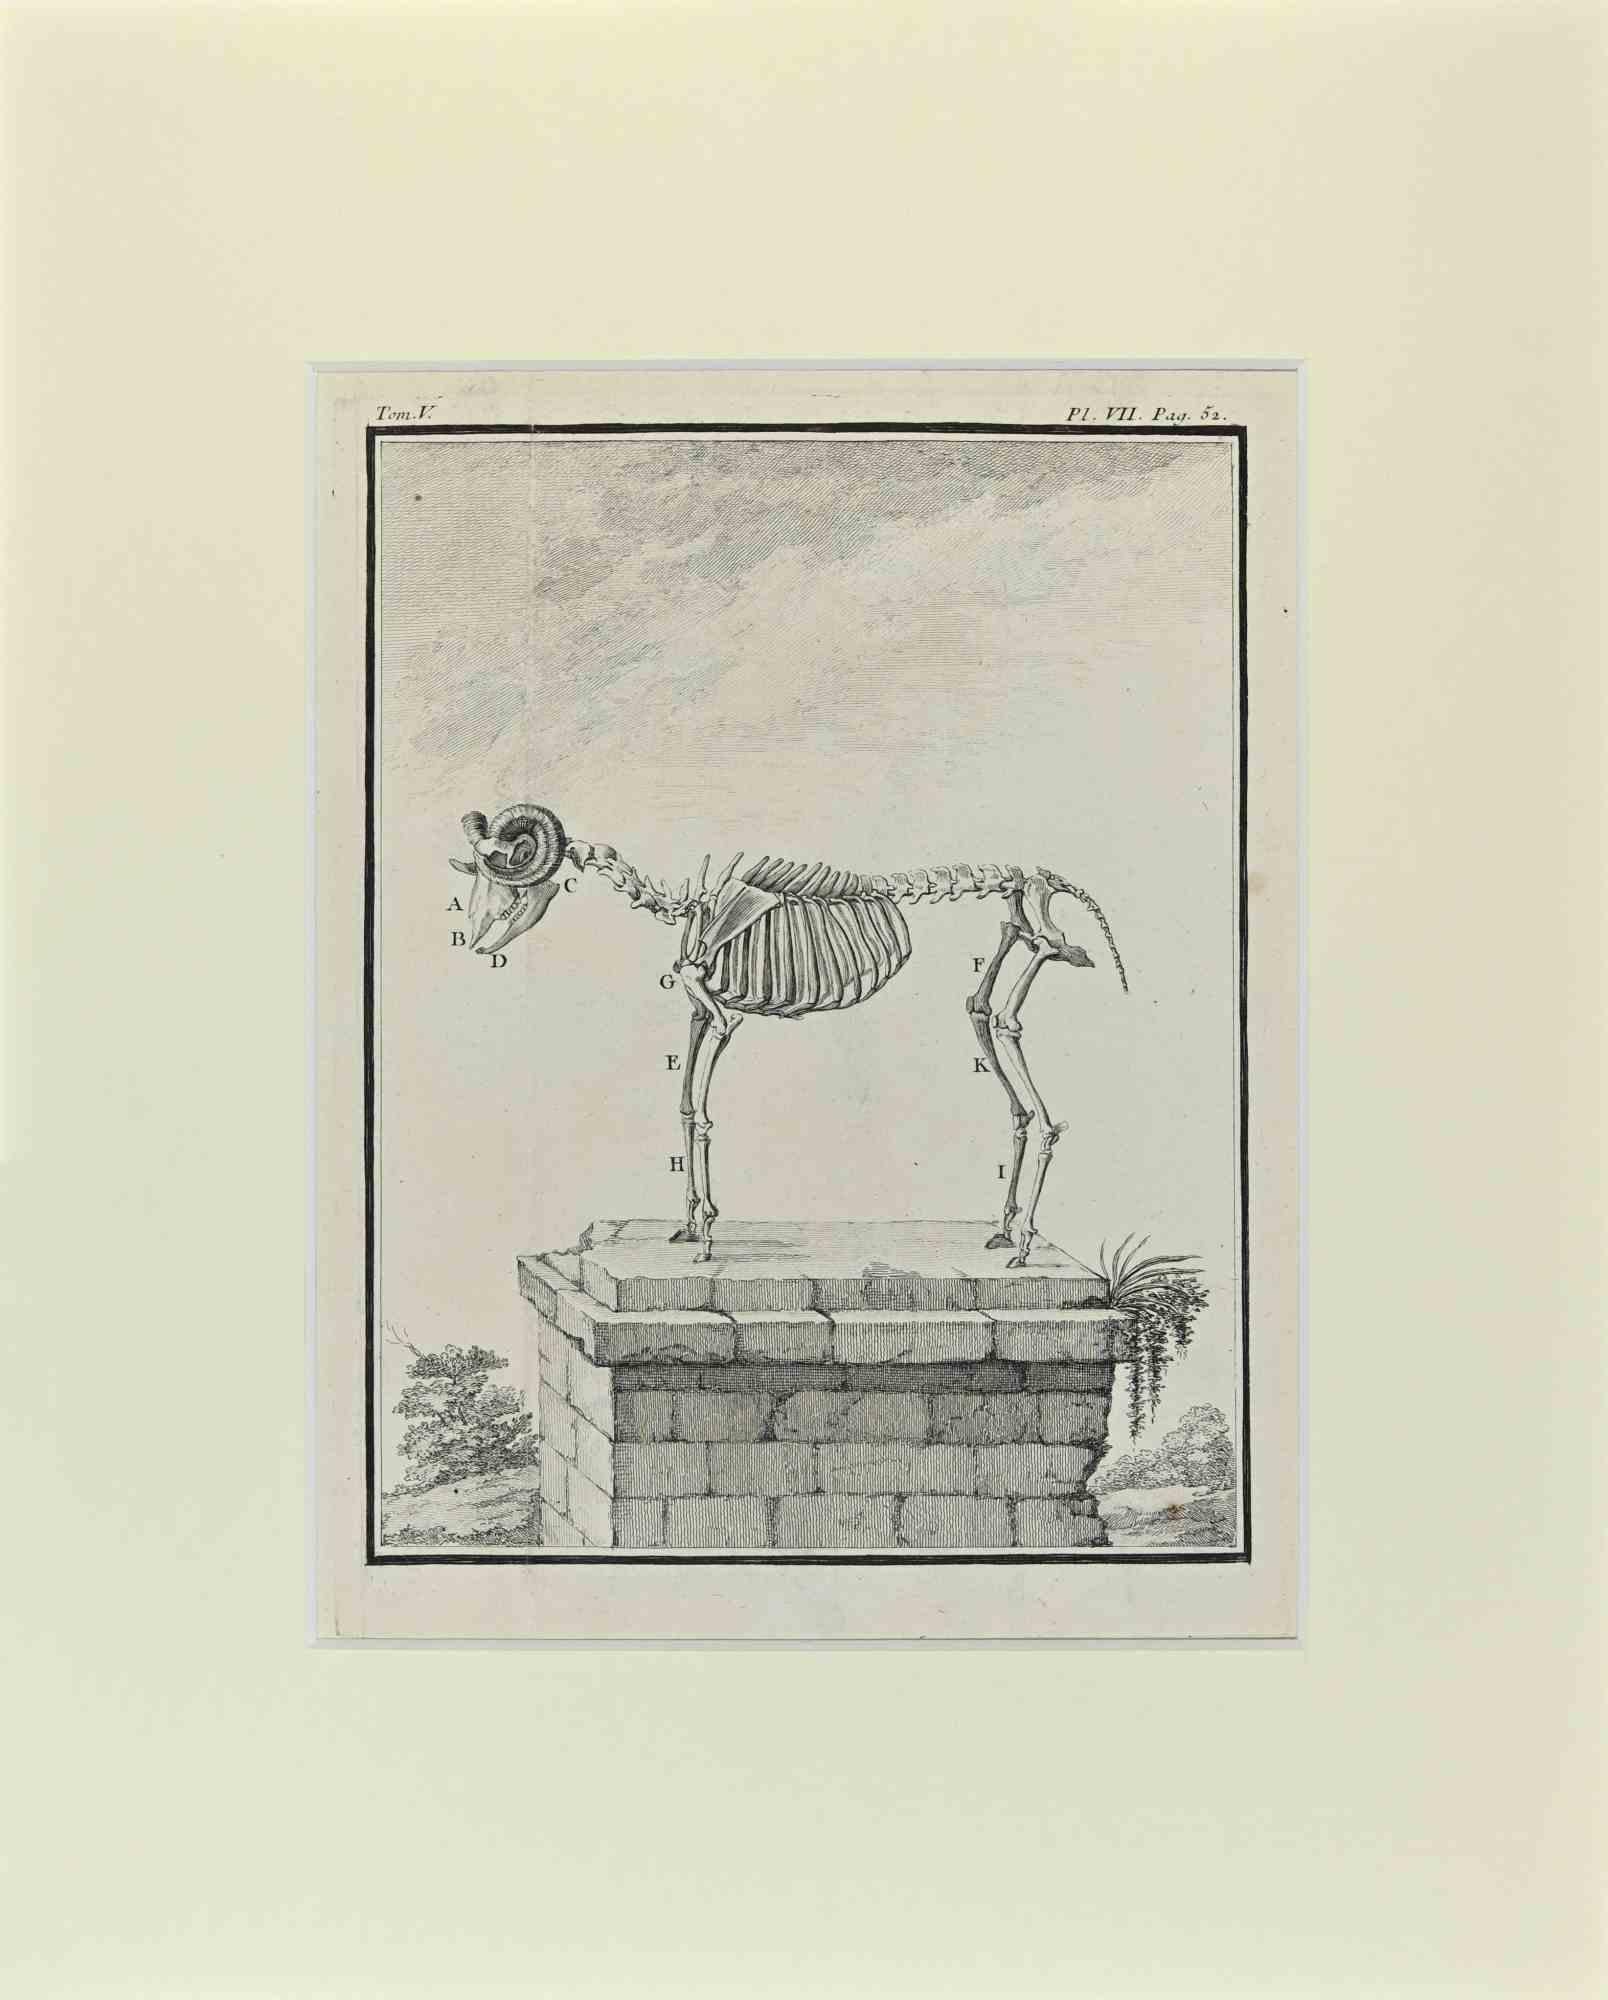 Sheep Skeleton is an artwork realized  by  Buvée l'Américain in 1771.  

Etching B./W. print  on ivory paper. Signed on  plate on the lower left margin.

The work is glued on cardboard. Total dimensions: 35x28 cm.

The artwork belongs to the suite